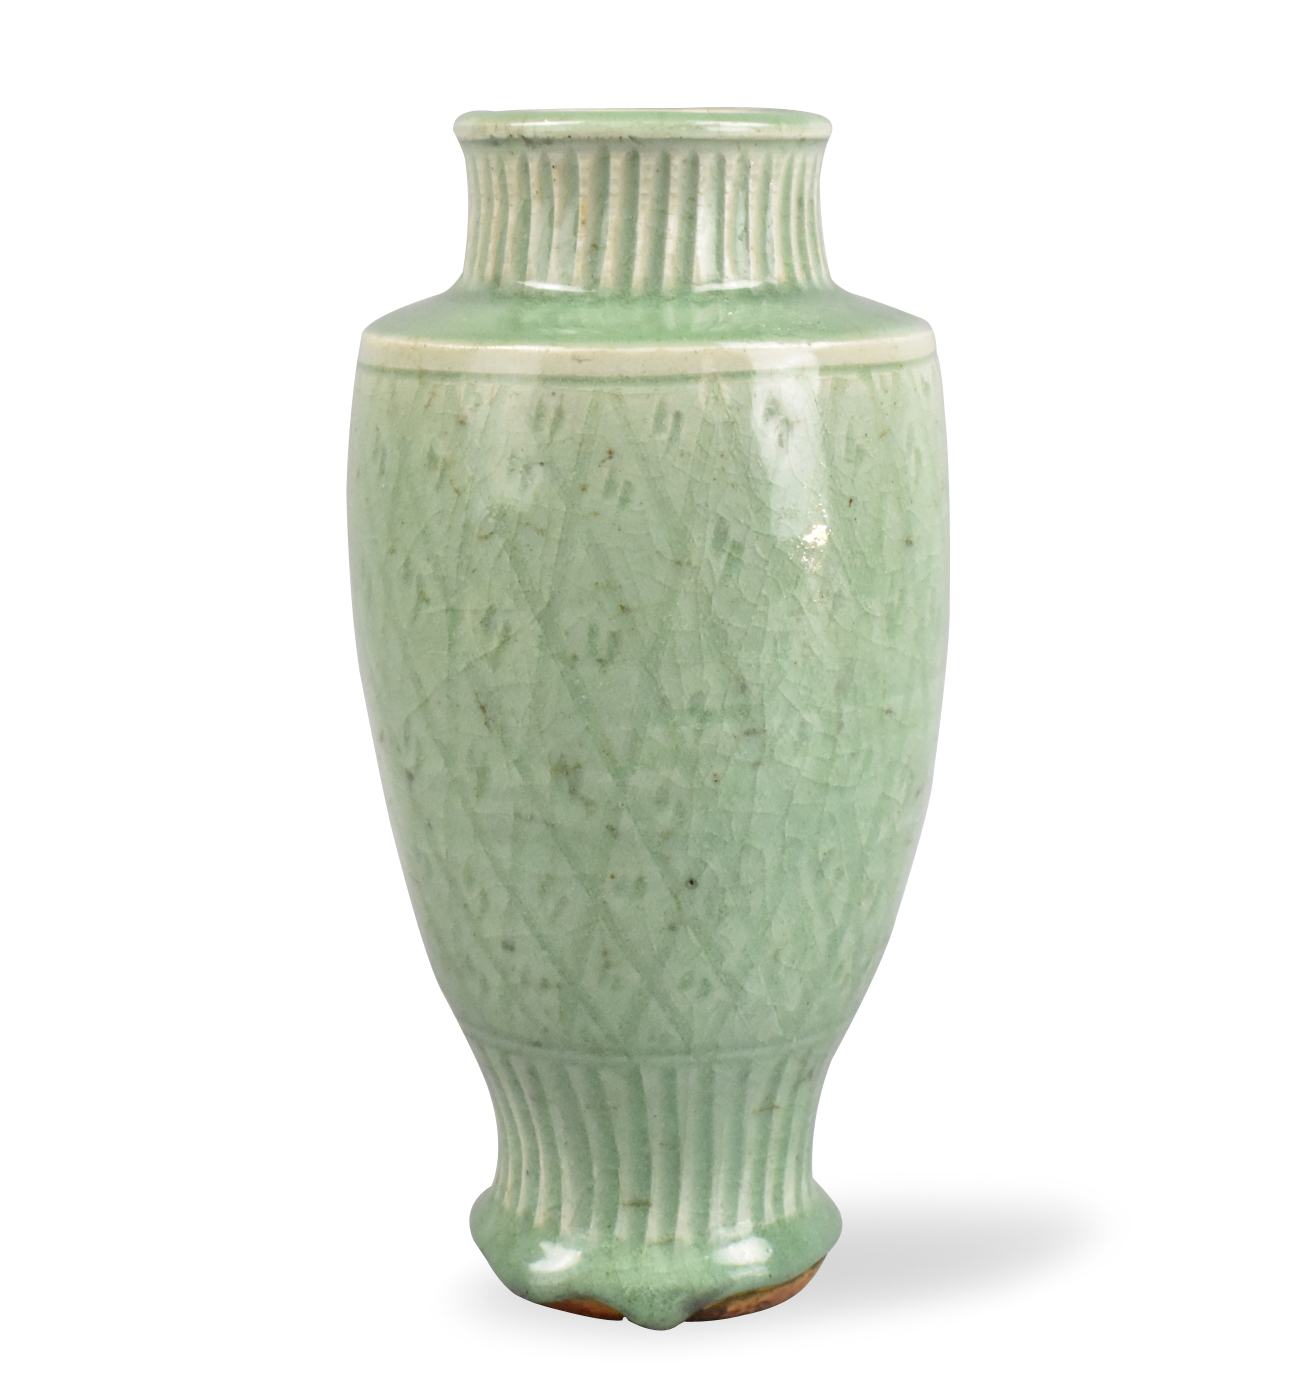 CHINESE LONGQUAN WARE CELADON GLAZED 33a54a